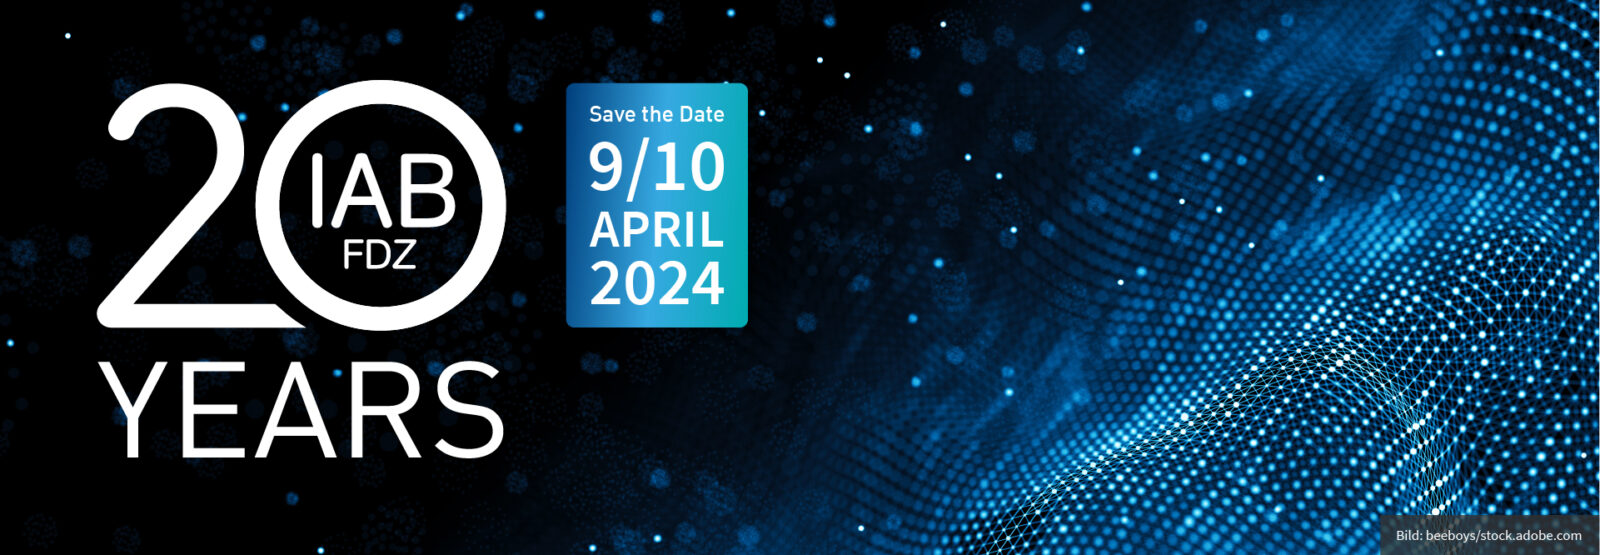 The picture shows a shiny net and the inscription 20 years of IAB-FDZ Save the Date 9/10 April 2024.